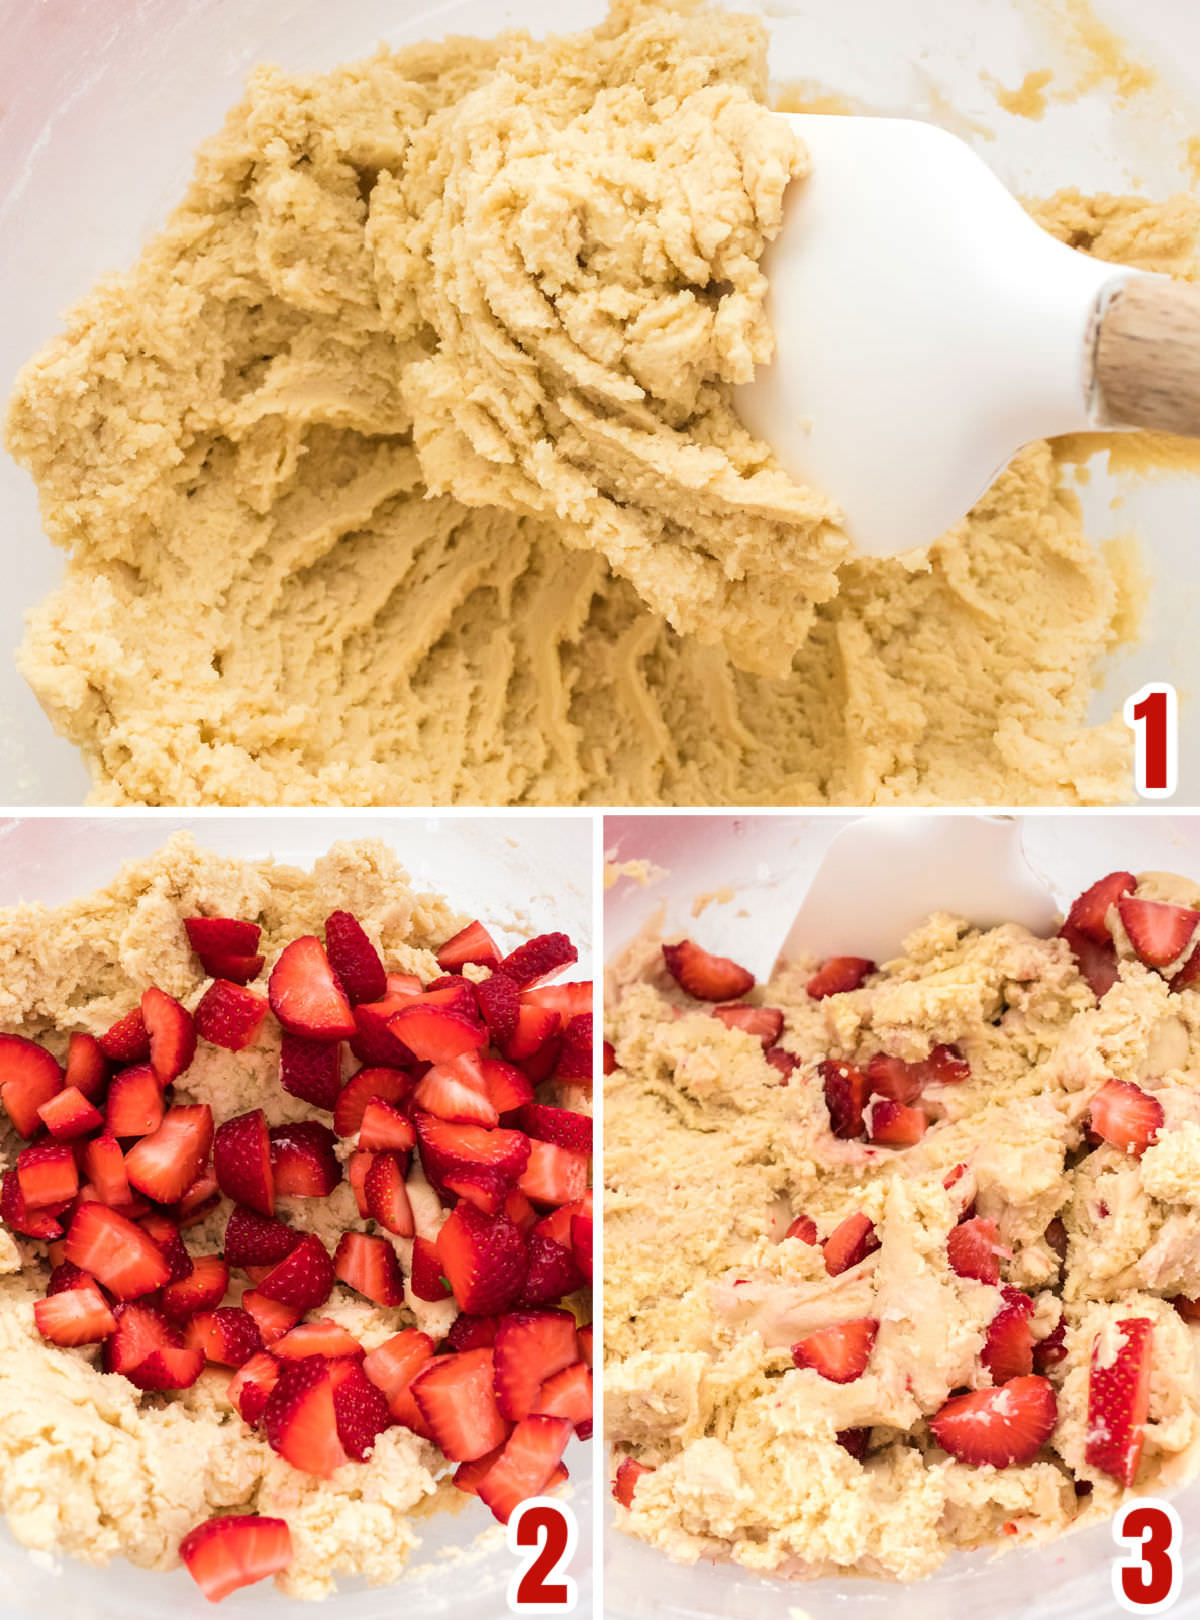 Collage image showing how to make the Strawberry Cookie dough.